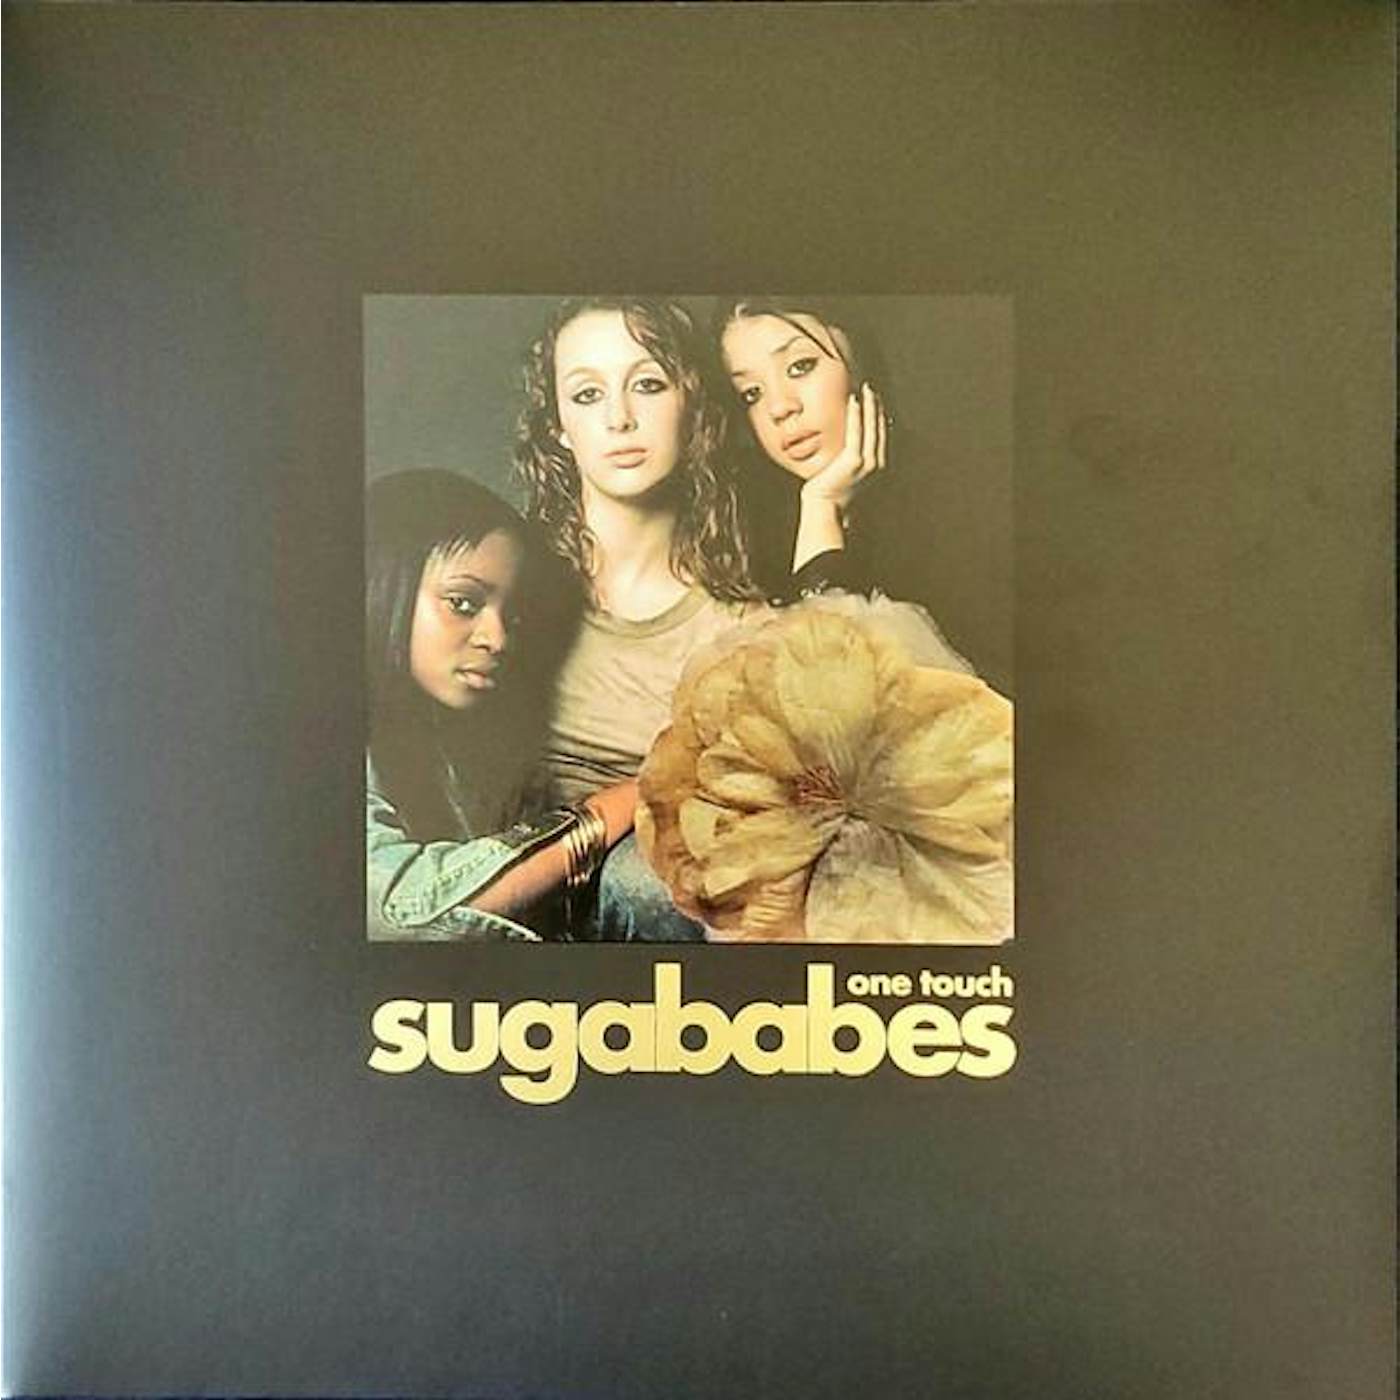 SUGABABES ONE TOUCH (20 YEAR ANNIVERSARY EDITION/DELUXE) Vinyl Record